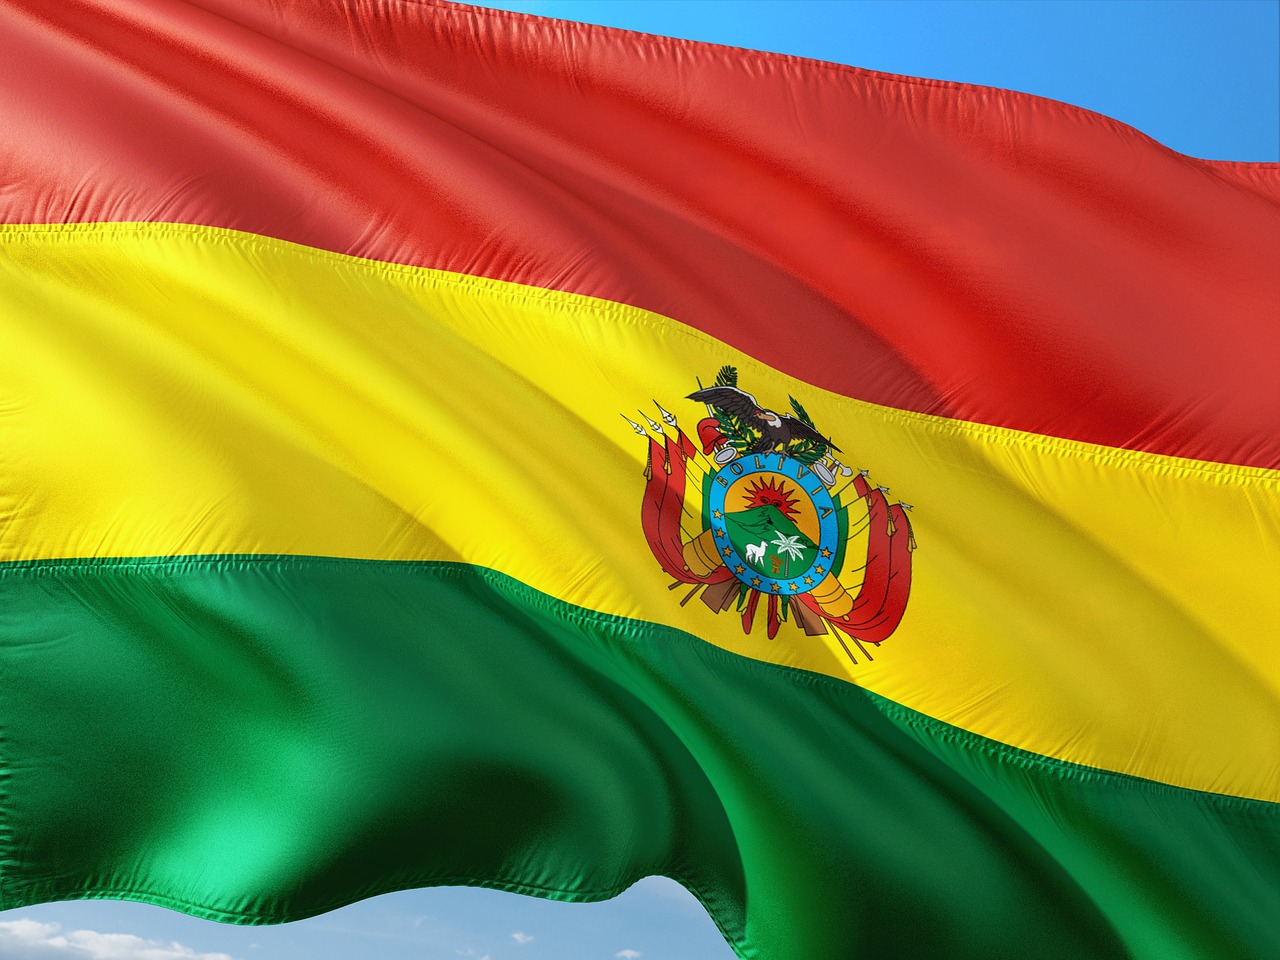 Bolivia authorities transfer general accused of failed coup attempt to maximum security prison